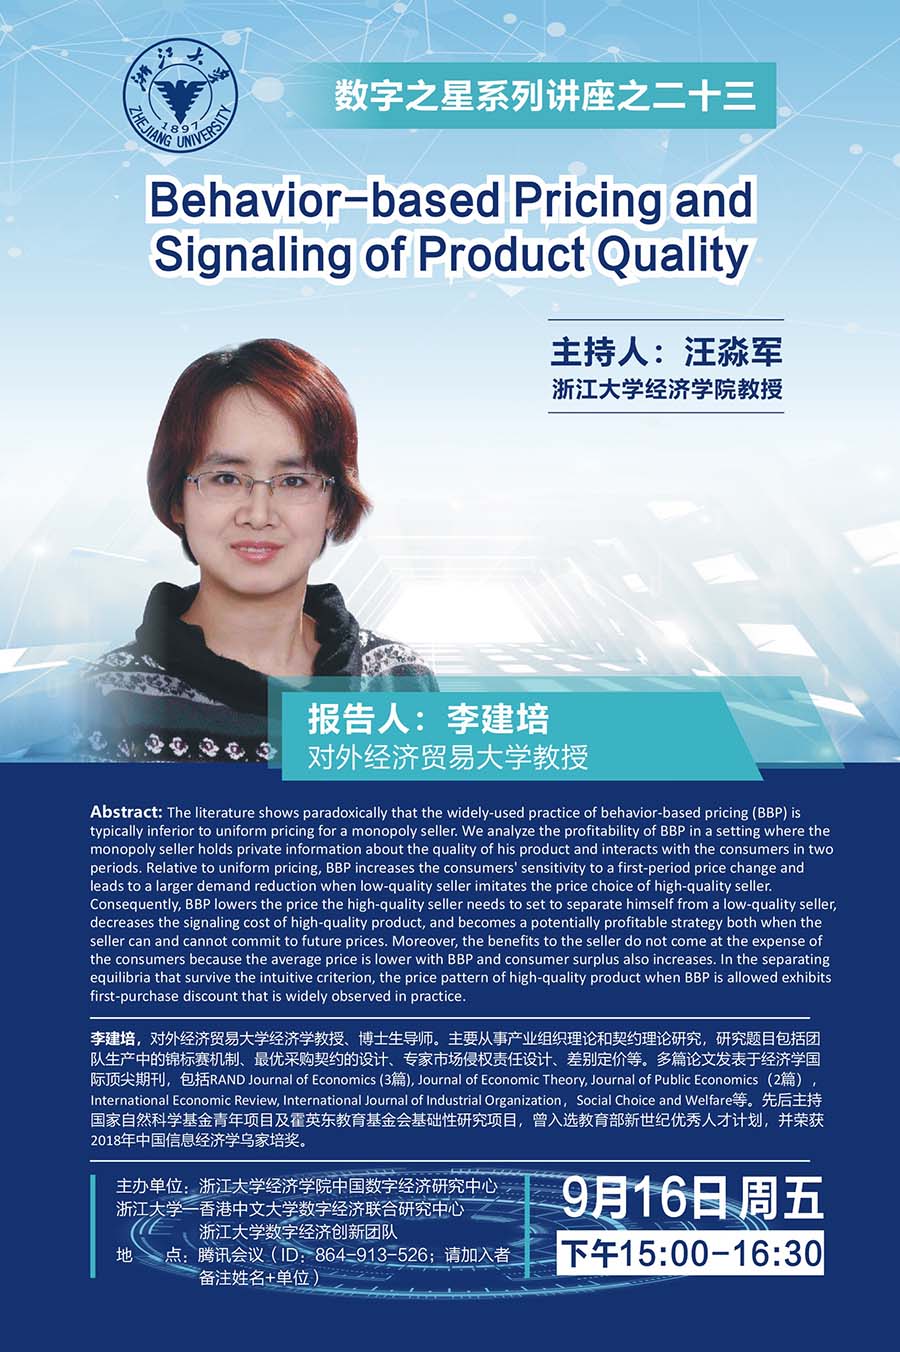 【 The Digital Star Seminar Series No.23 】Behavior-based Pricing and Signaling of Product Quality